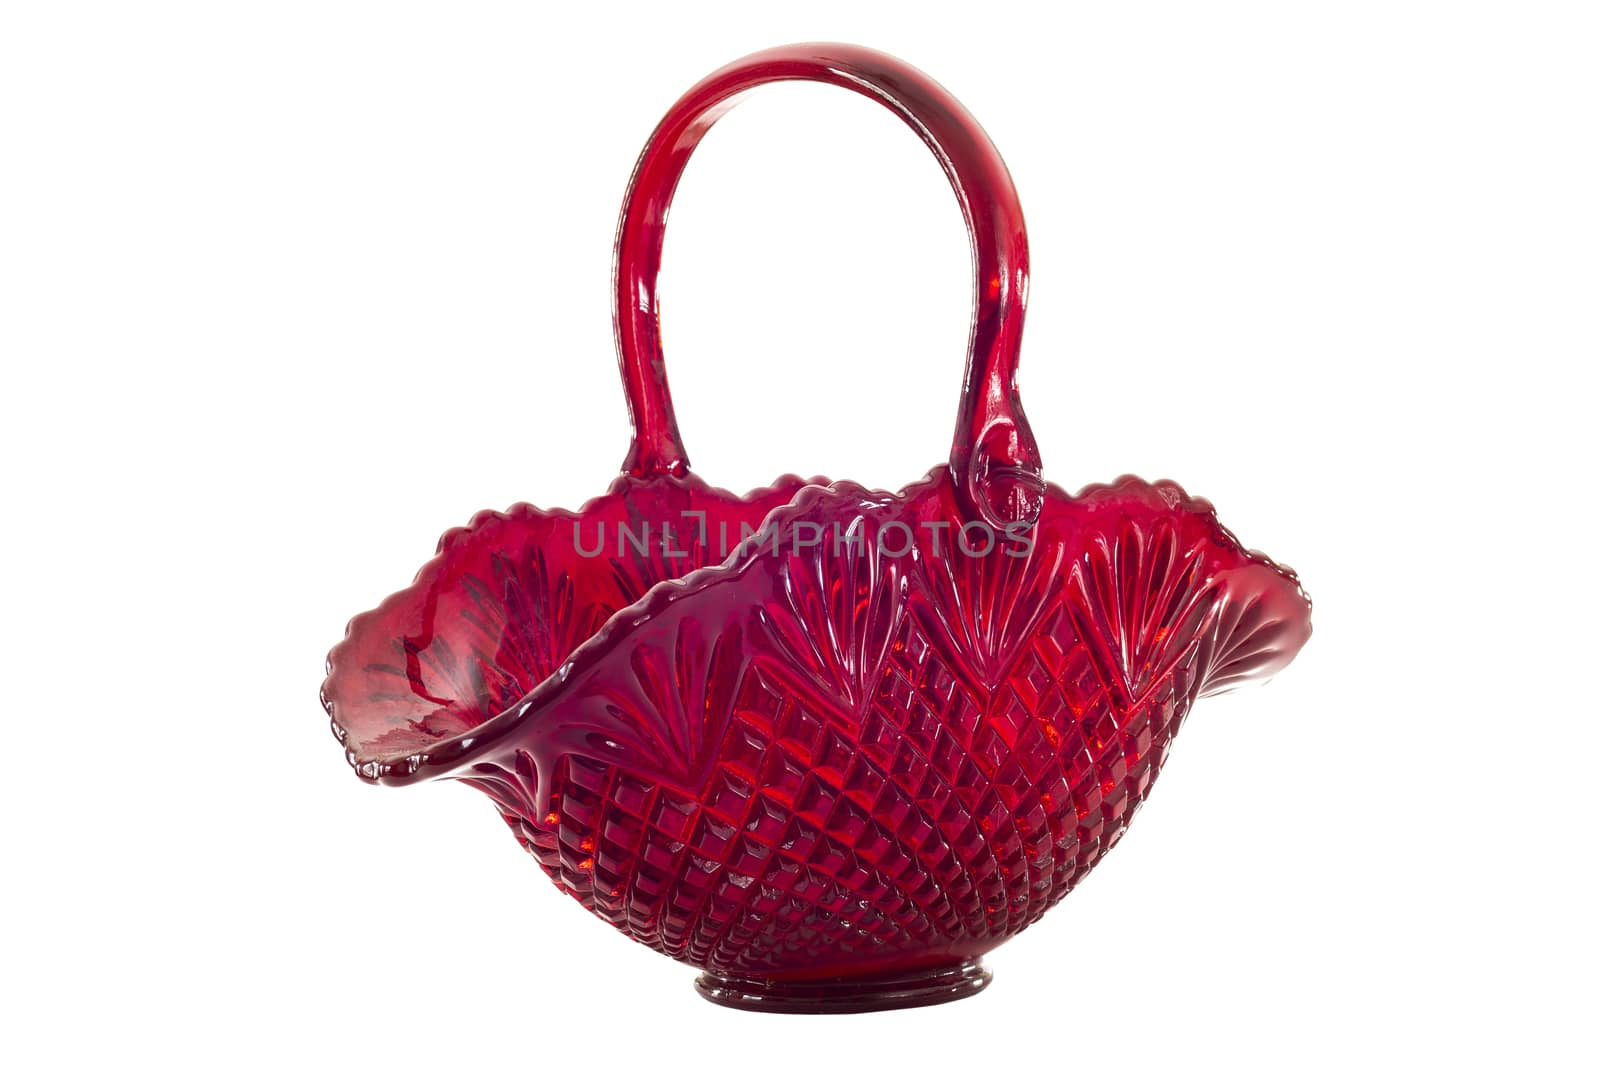 Horizontal side view shot of a beautiful old red glass basket with a handle.  Shot on a white background.